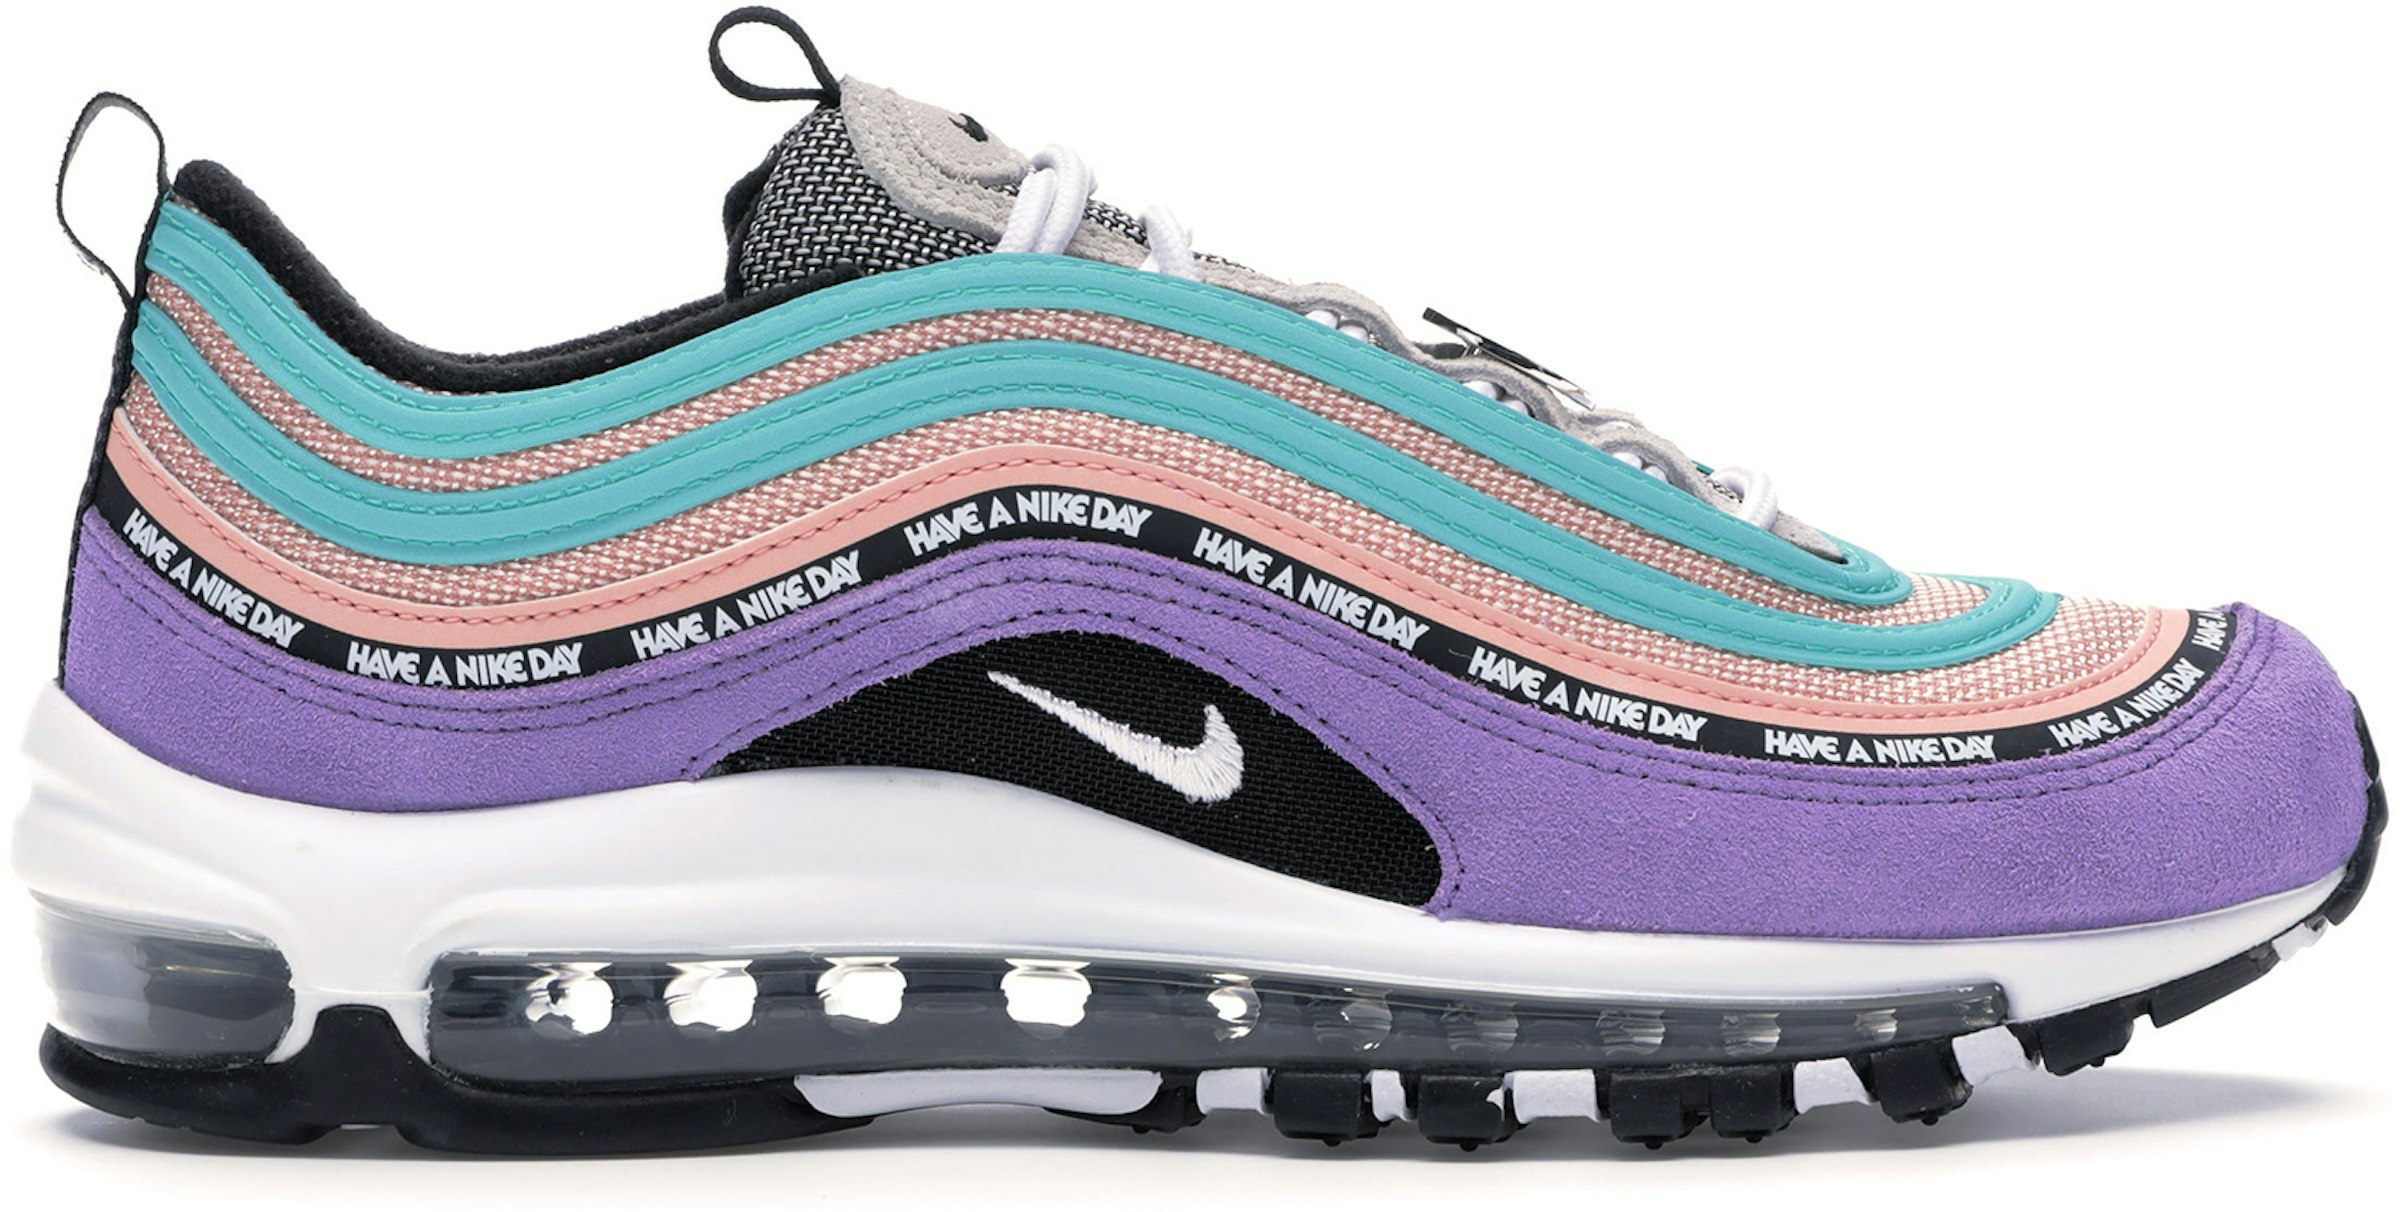 Nike Air Max 97 Have a Day (GS) Kids' - 923288-500 - US